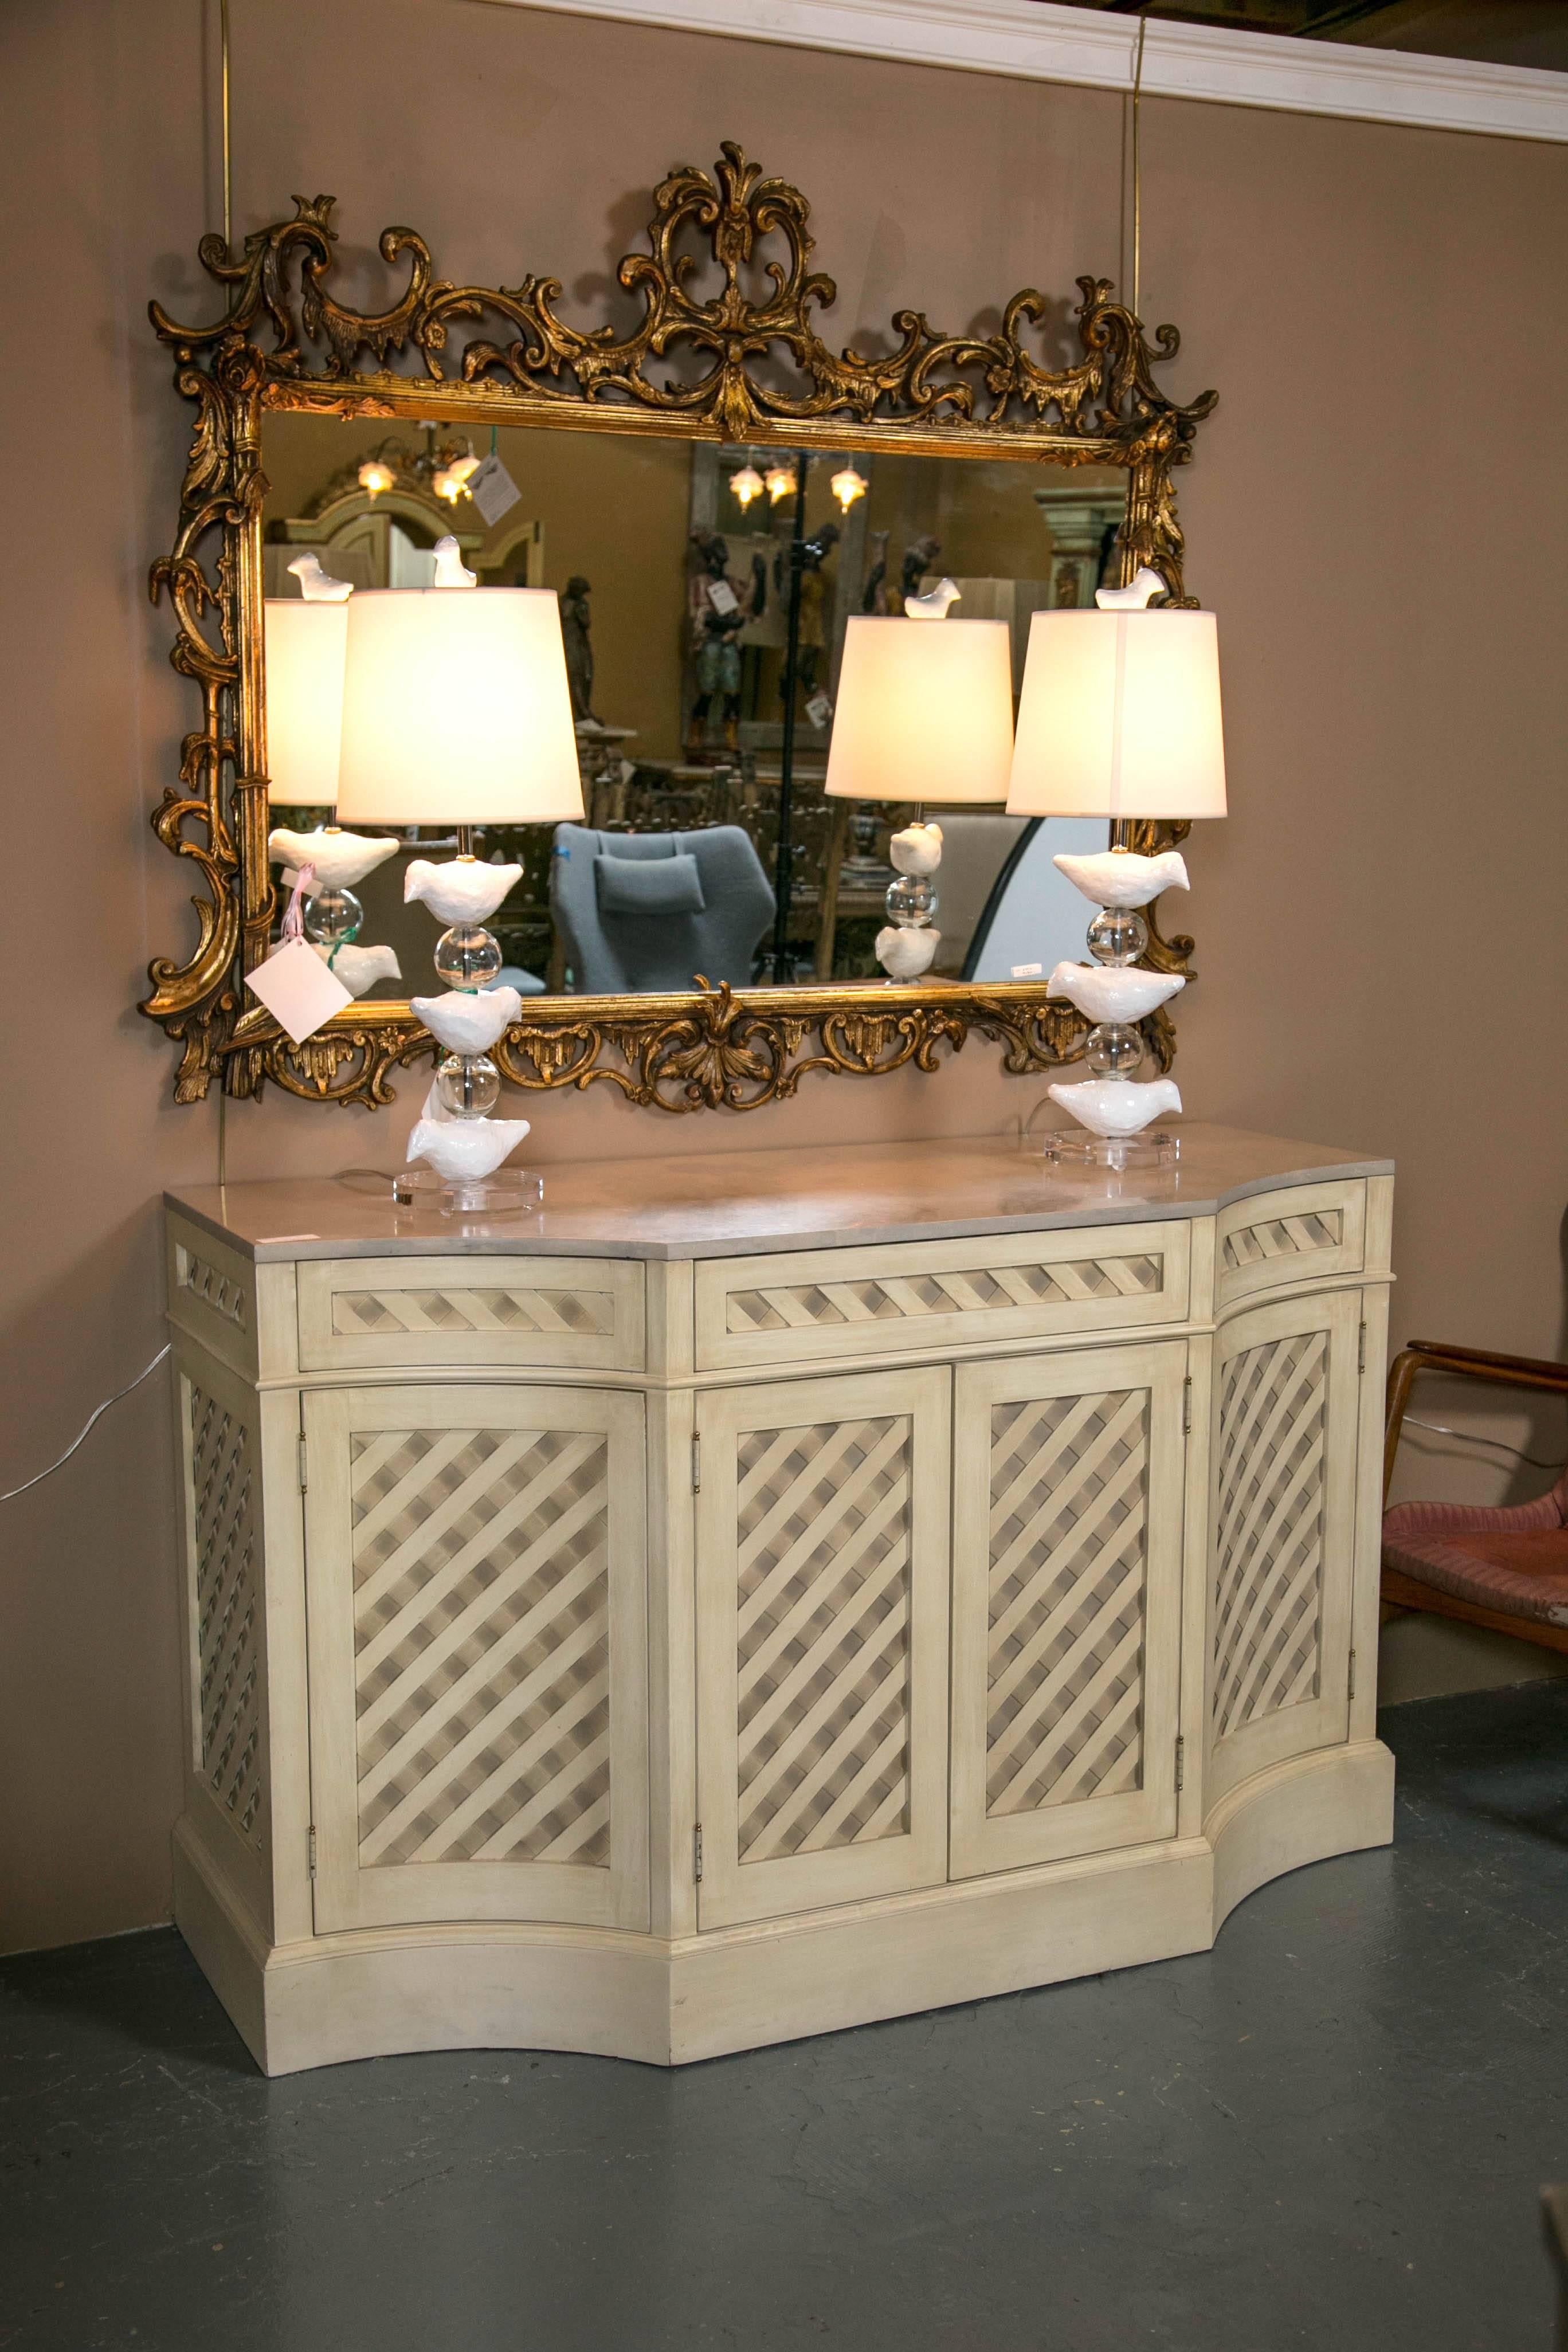 Designer marble-top painted checkerboard sideboard. Custom quality at its finest. This is a solid wood, through and though, custom sideboard. The concaved corner front flaking a pair of flat doors all leading to a finished single shelf interior. The